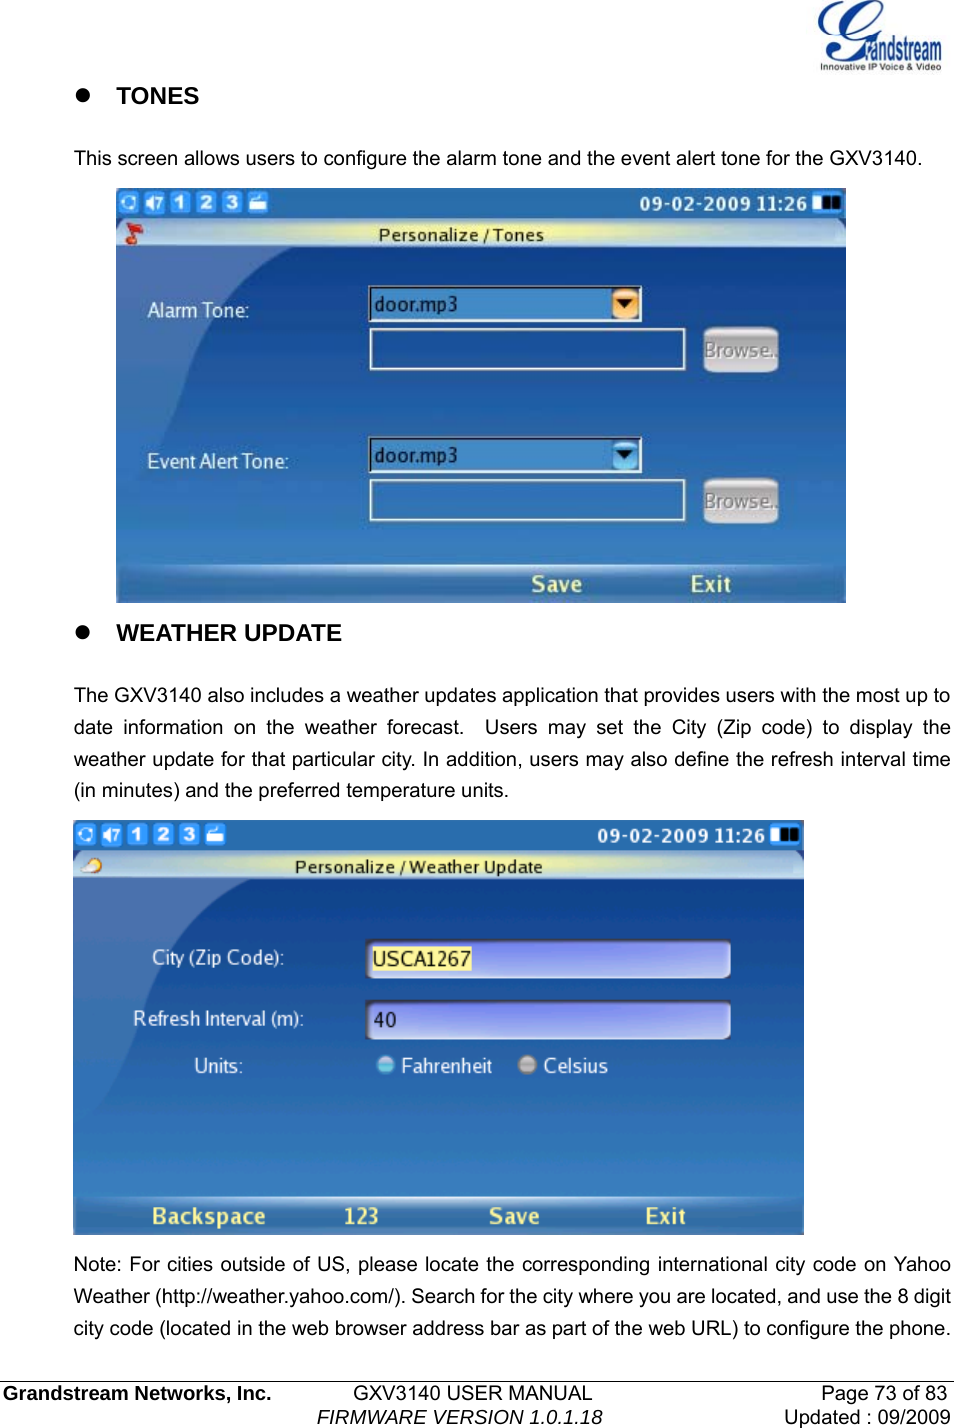   Grandstream Networks, Inc.        GXV3140 USER MANUAL                       Page 73 of 83                                FIRMWARE VERSION 1.0.1.18 Updated : 09/2009  z TONES  This screen allows users to configure the alarm tone and the event alert tone for the GXV3140.  z WEATHER UPDATE  The GXV3140 also includes a weather updates application that provides users with the most up to date information on the weather forecast.  Users may set the City (Zip code) to display the weather update for that particular city. In addition, users may also define the refresh interval time (in minutes) and the preferred temperature units.  Note: For cities outside of US, please locate the corresponding international city code on Yahoo Weather (http://weather.yahoo.com/). Search for the city where you are located, and use the 8 digit city code (located in the web browser address bar as part of the web URL) to configure the phone. 